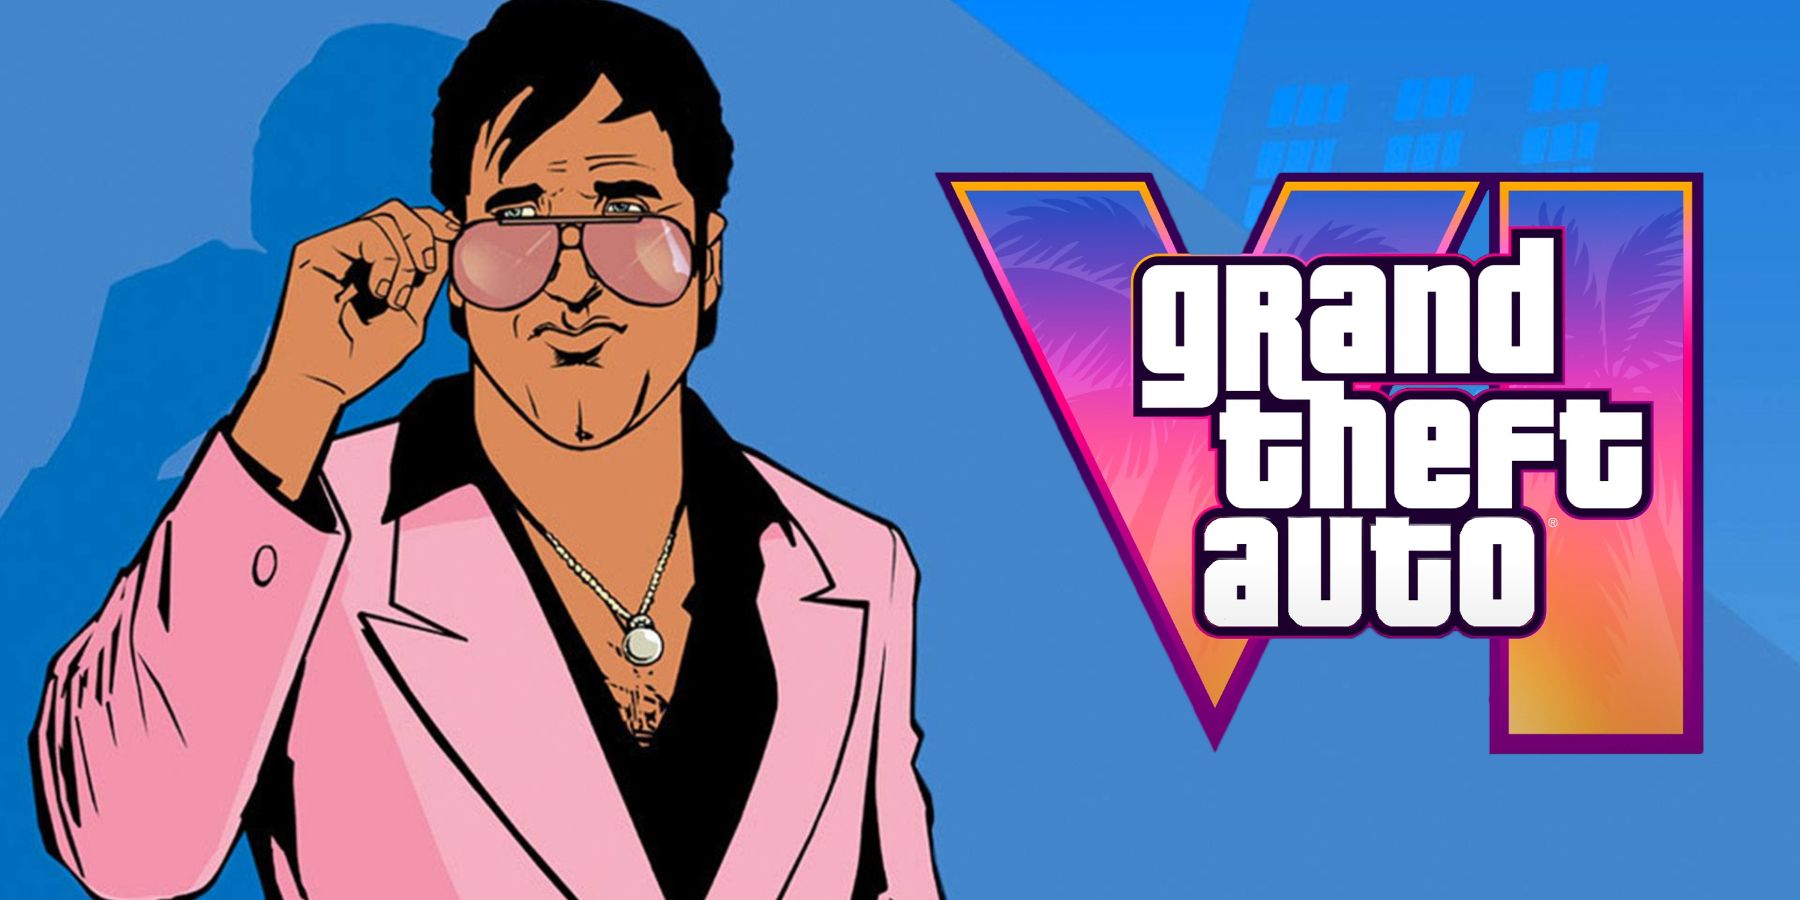 Classic Vice City Easter Eggs That Grand Theft Auto 6 Should Bring Back